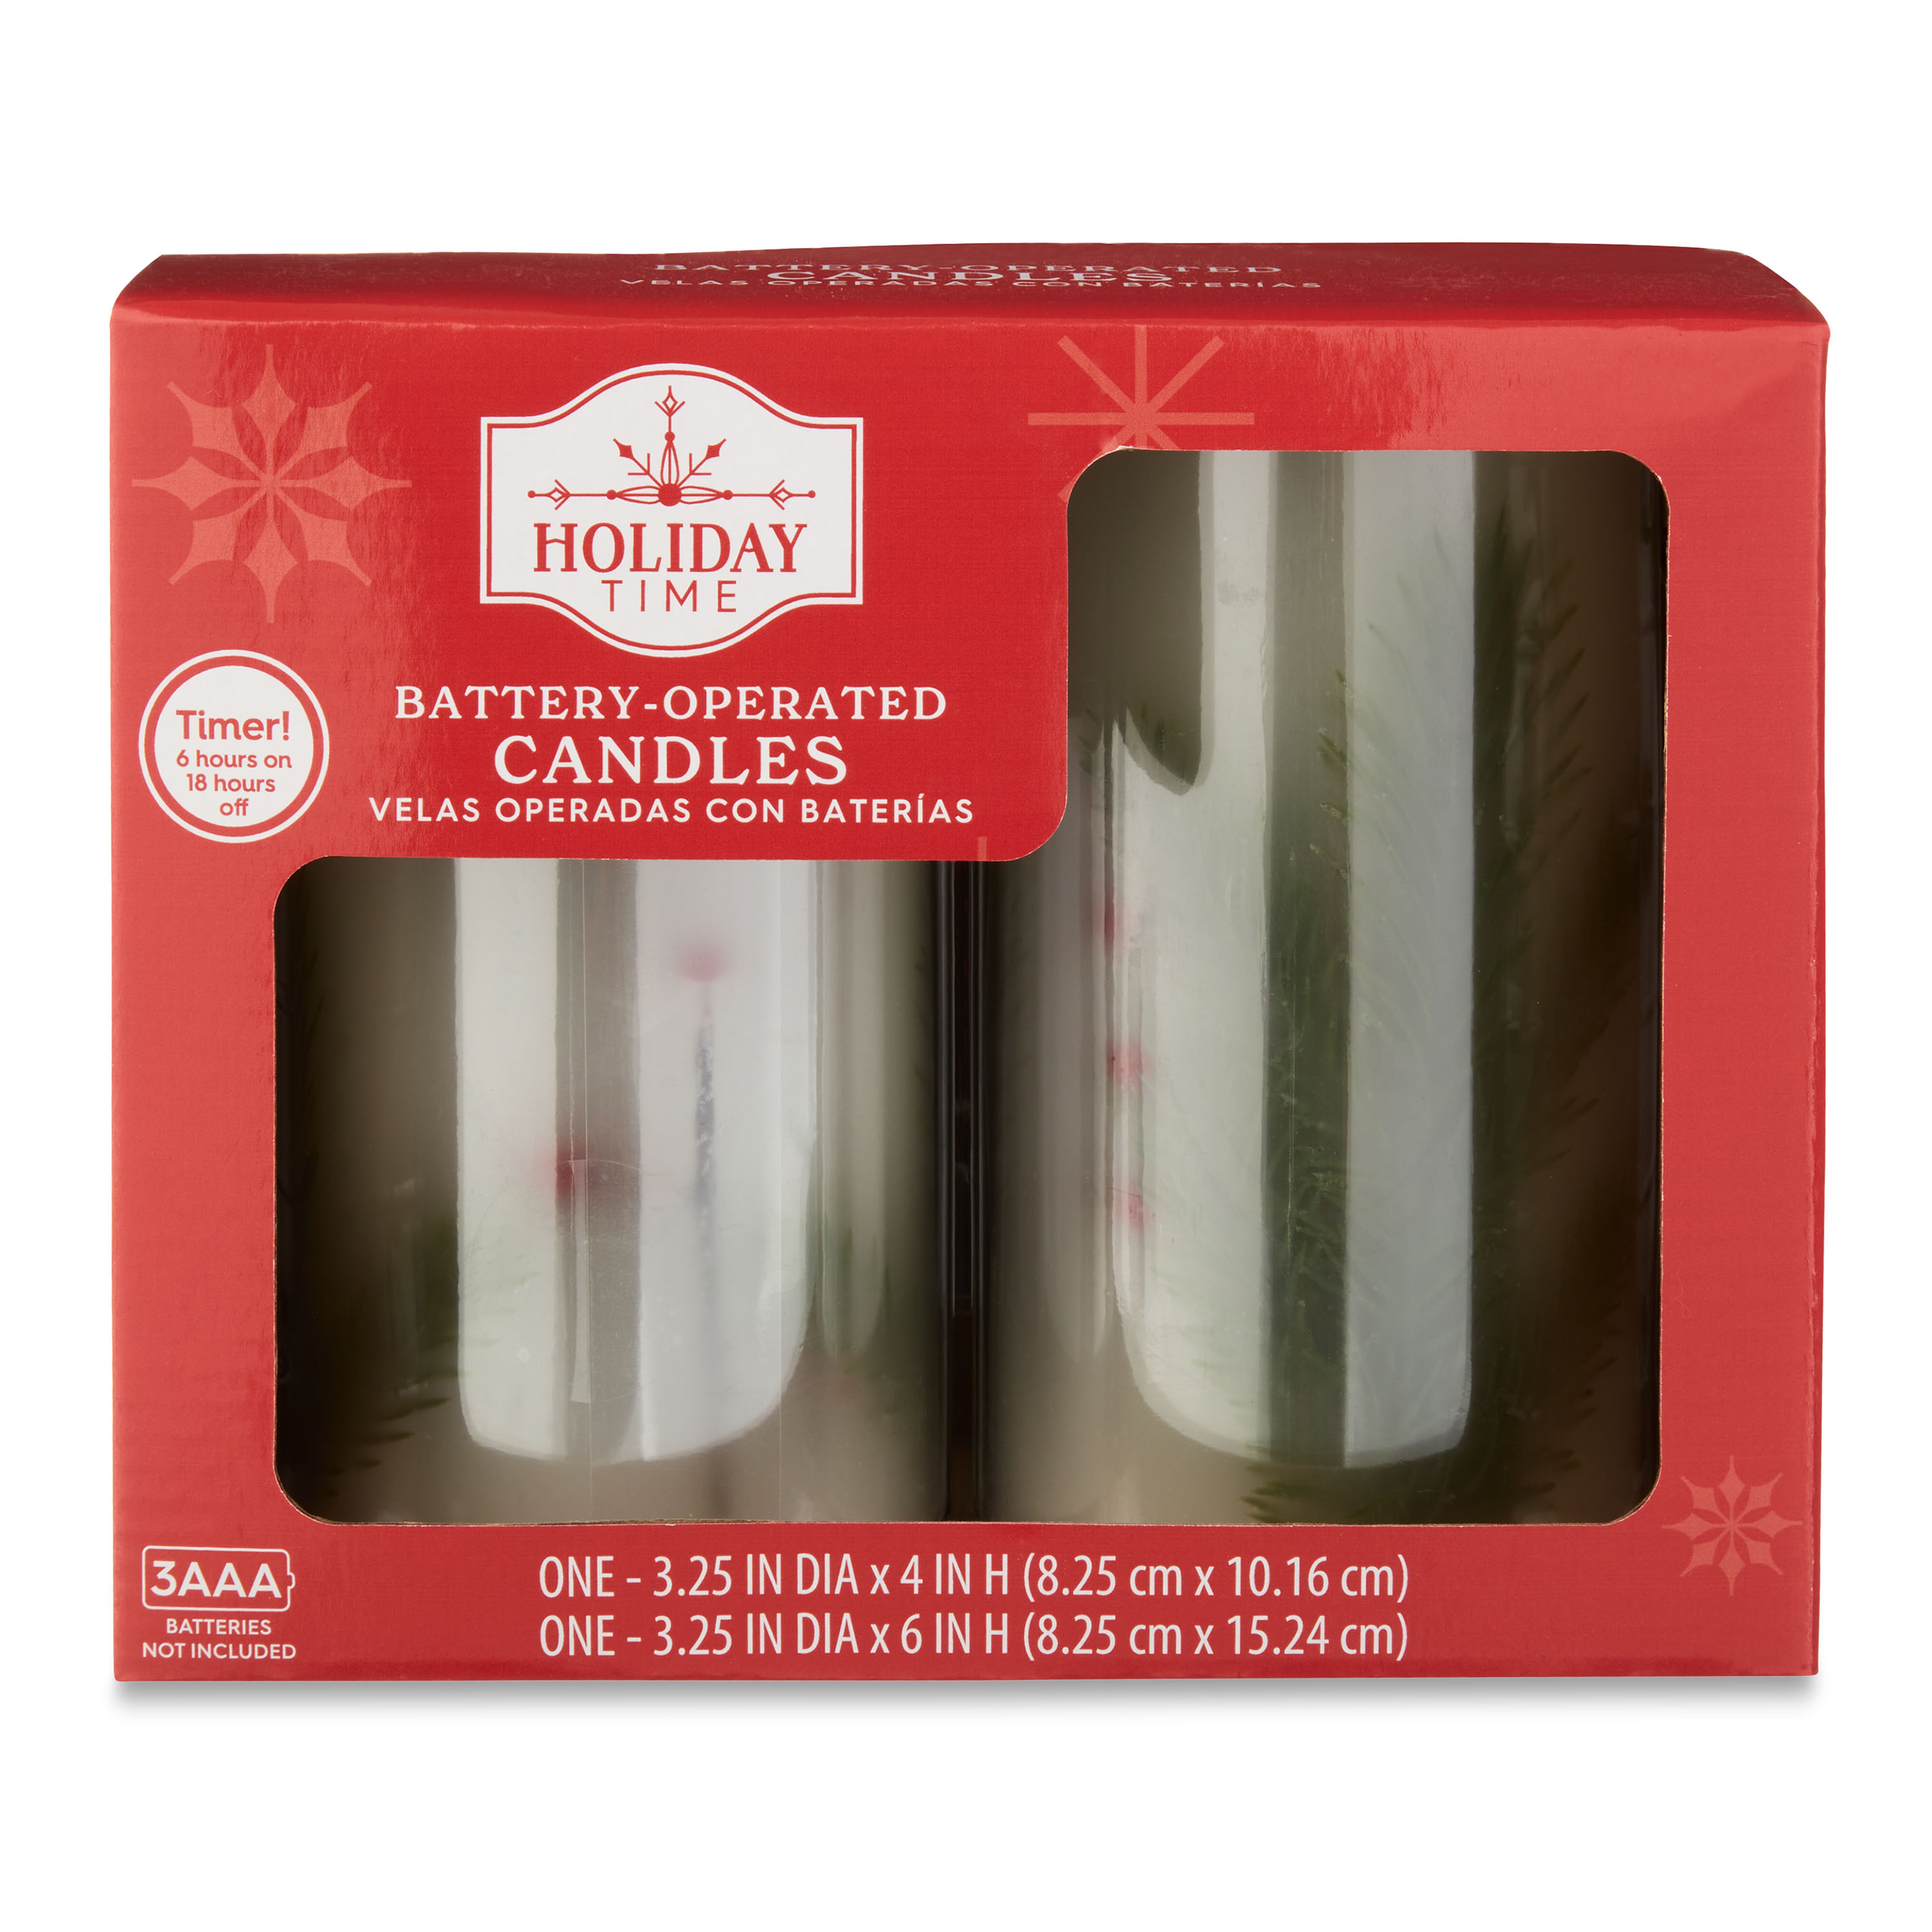 Holiday Time 3.25x4 and 3.25x6 inch Led Flameless Pillar Candles, White Unscented Wax with Red Berry&Evergreen ,Warm White Light,Set Pack - image 5 of 5